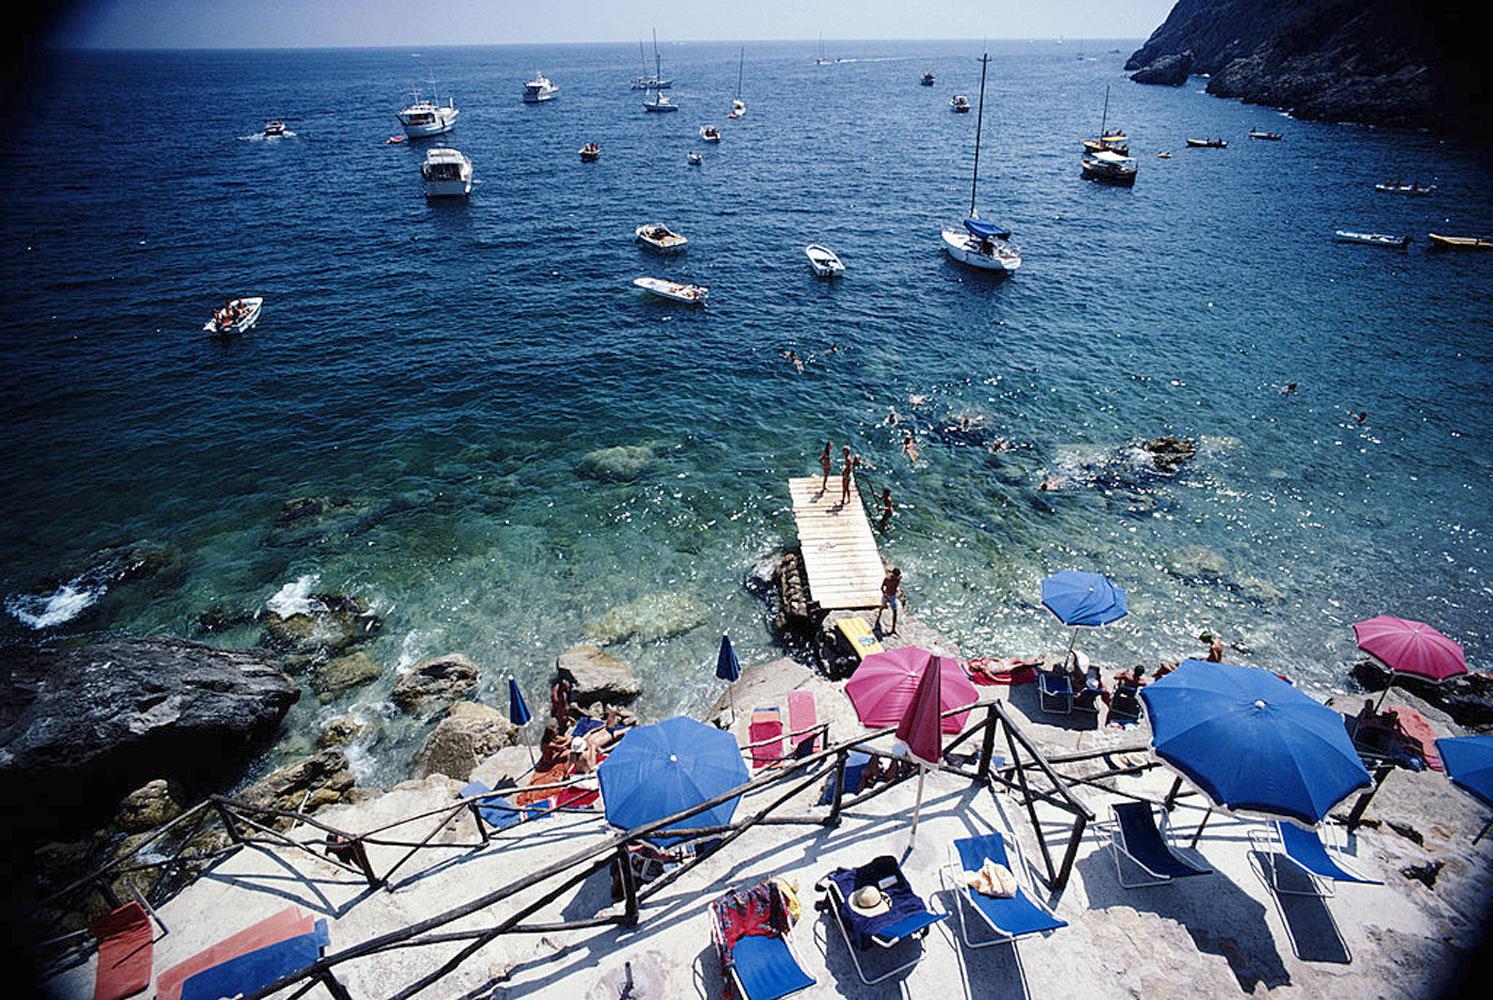 Slim Aarons
Porto Ercole
1980
C print
Estate stamped and hand numbered edition of 150 with certificate of authenticity from the estate.   

A jetty juts out from a rocky shoreline in Porto Ercole, Tuscany, August 1980. 
(Photo by Slim Aarons/Hulton